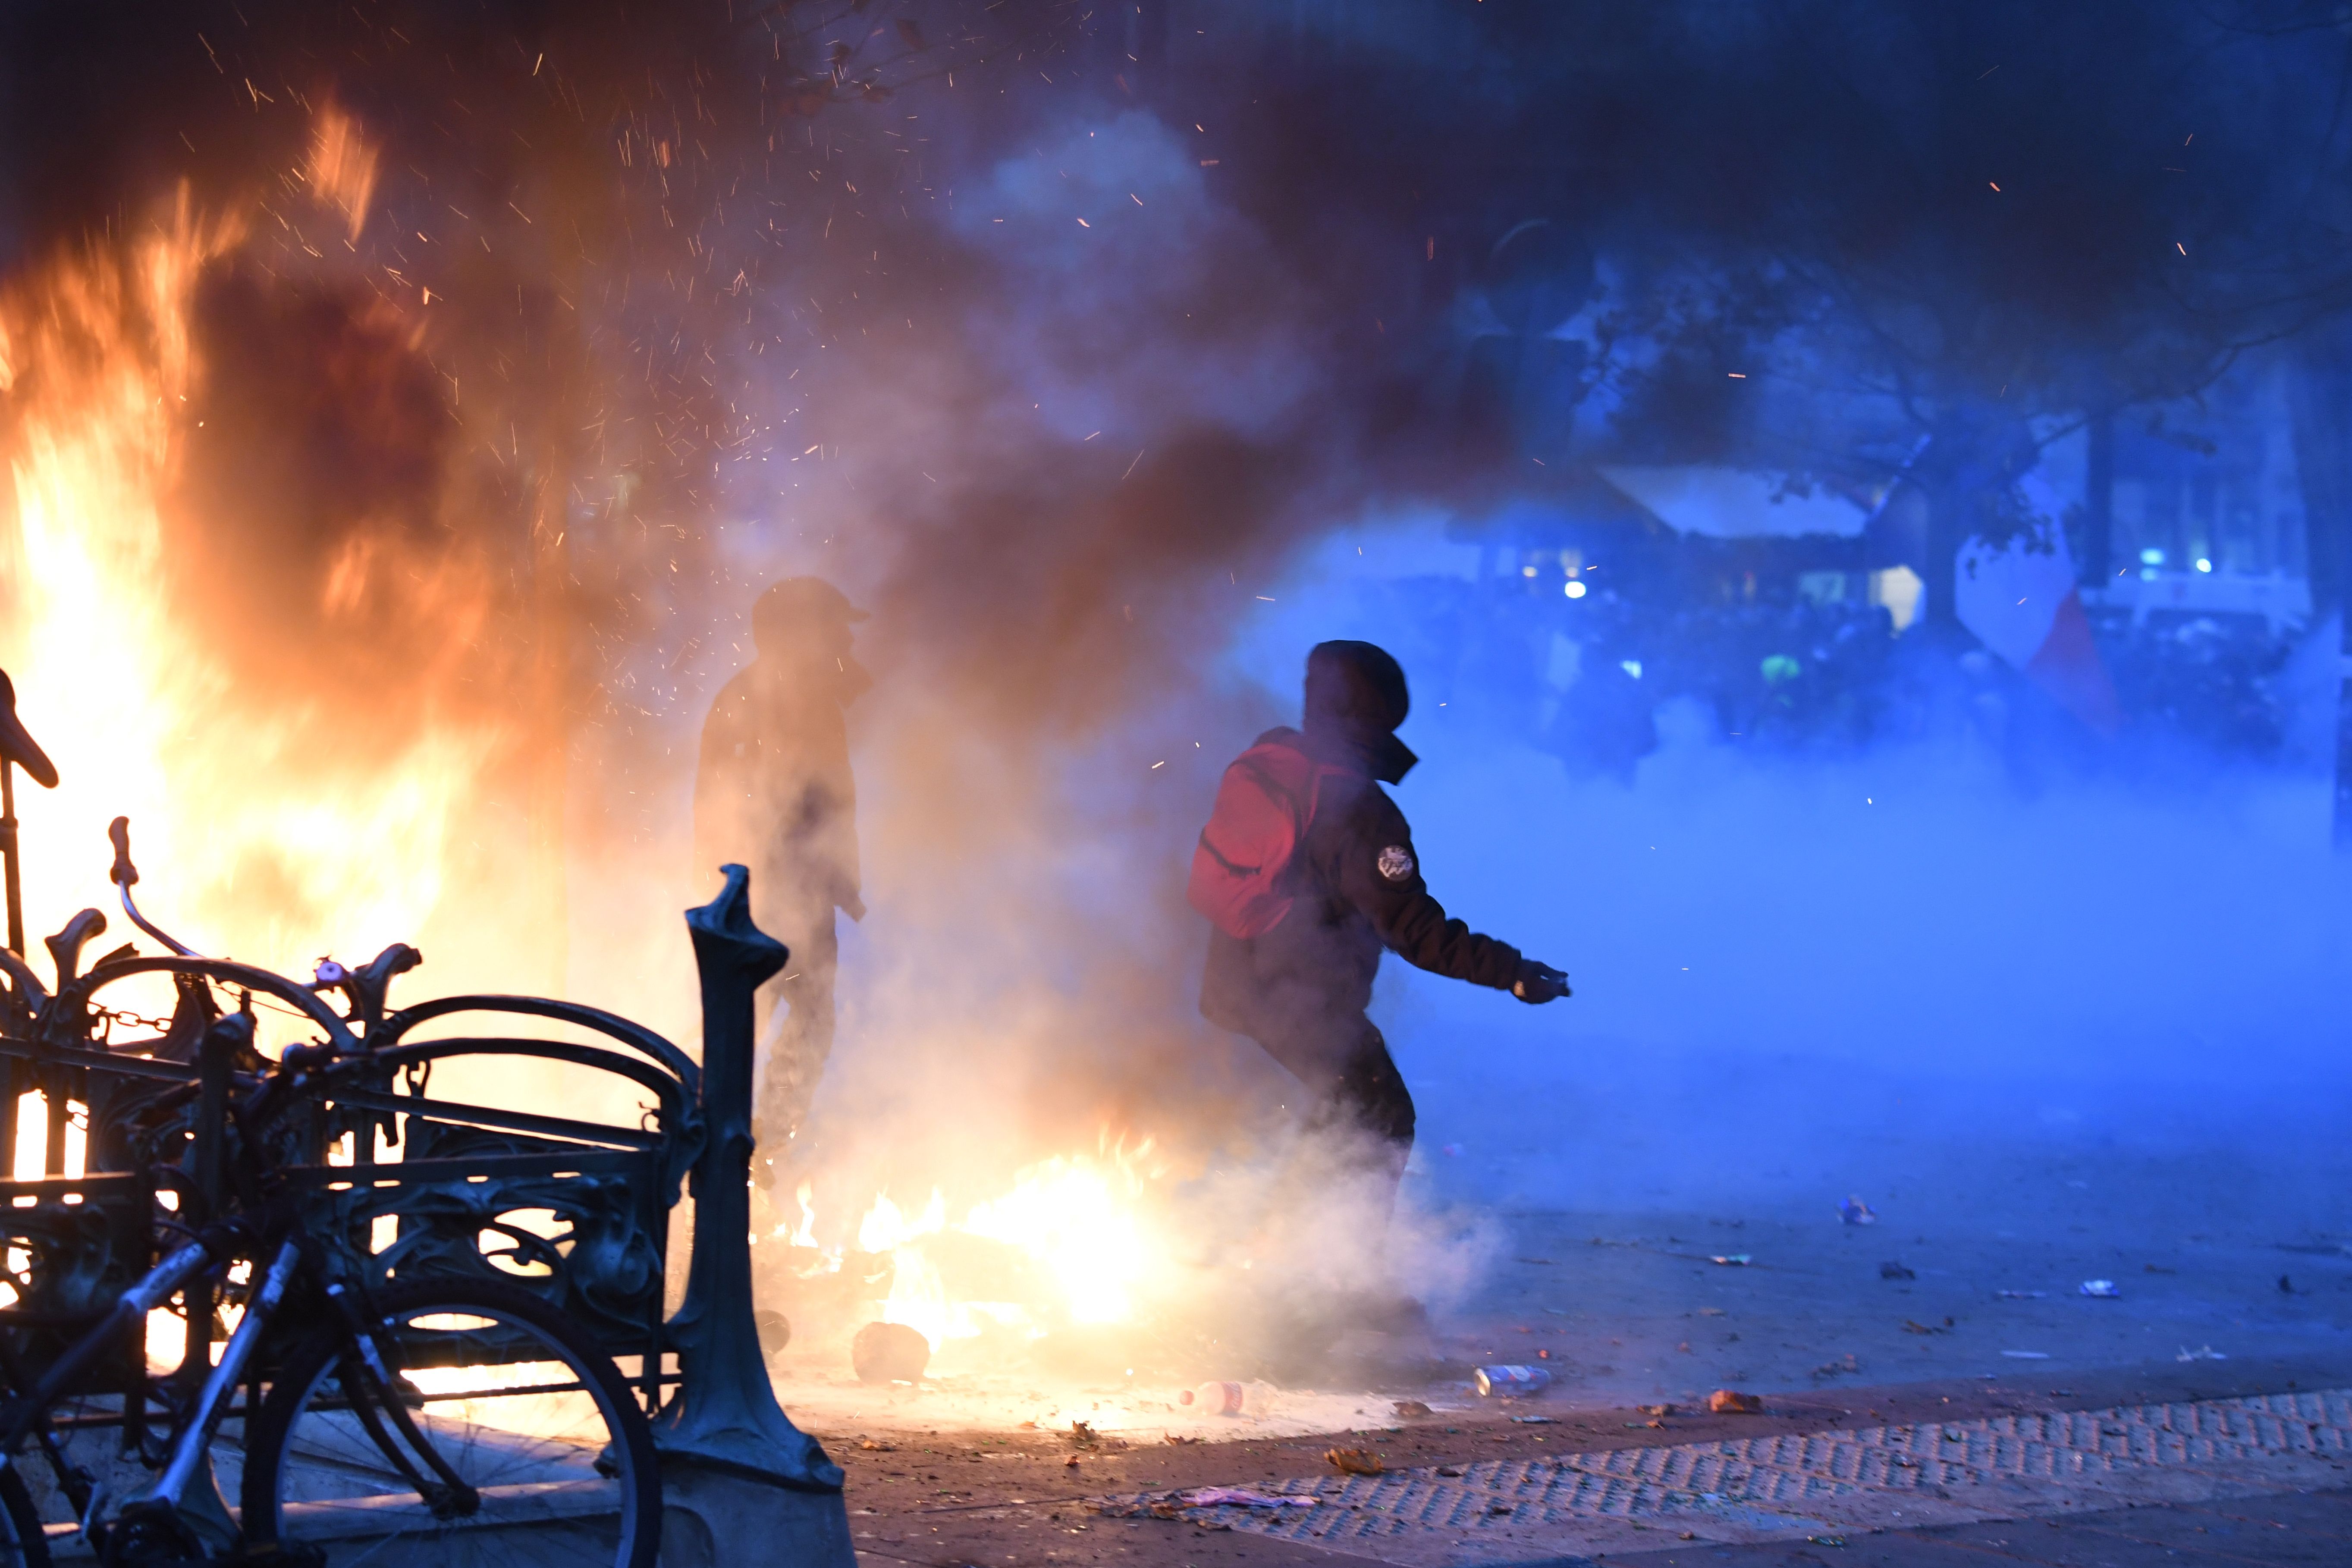 Two protesters stand next to a fire in Paris.